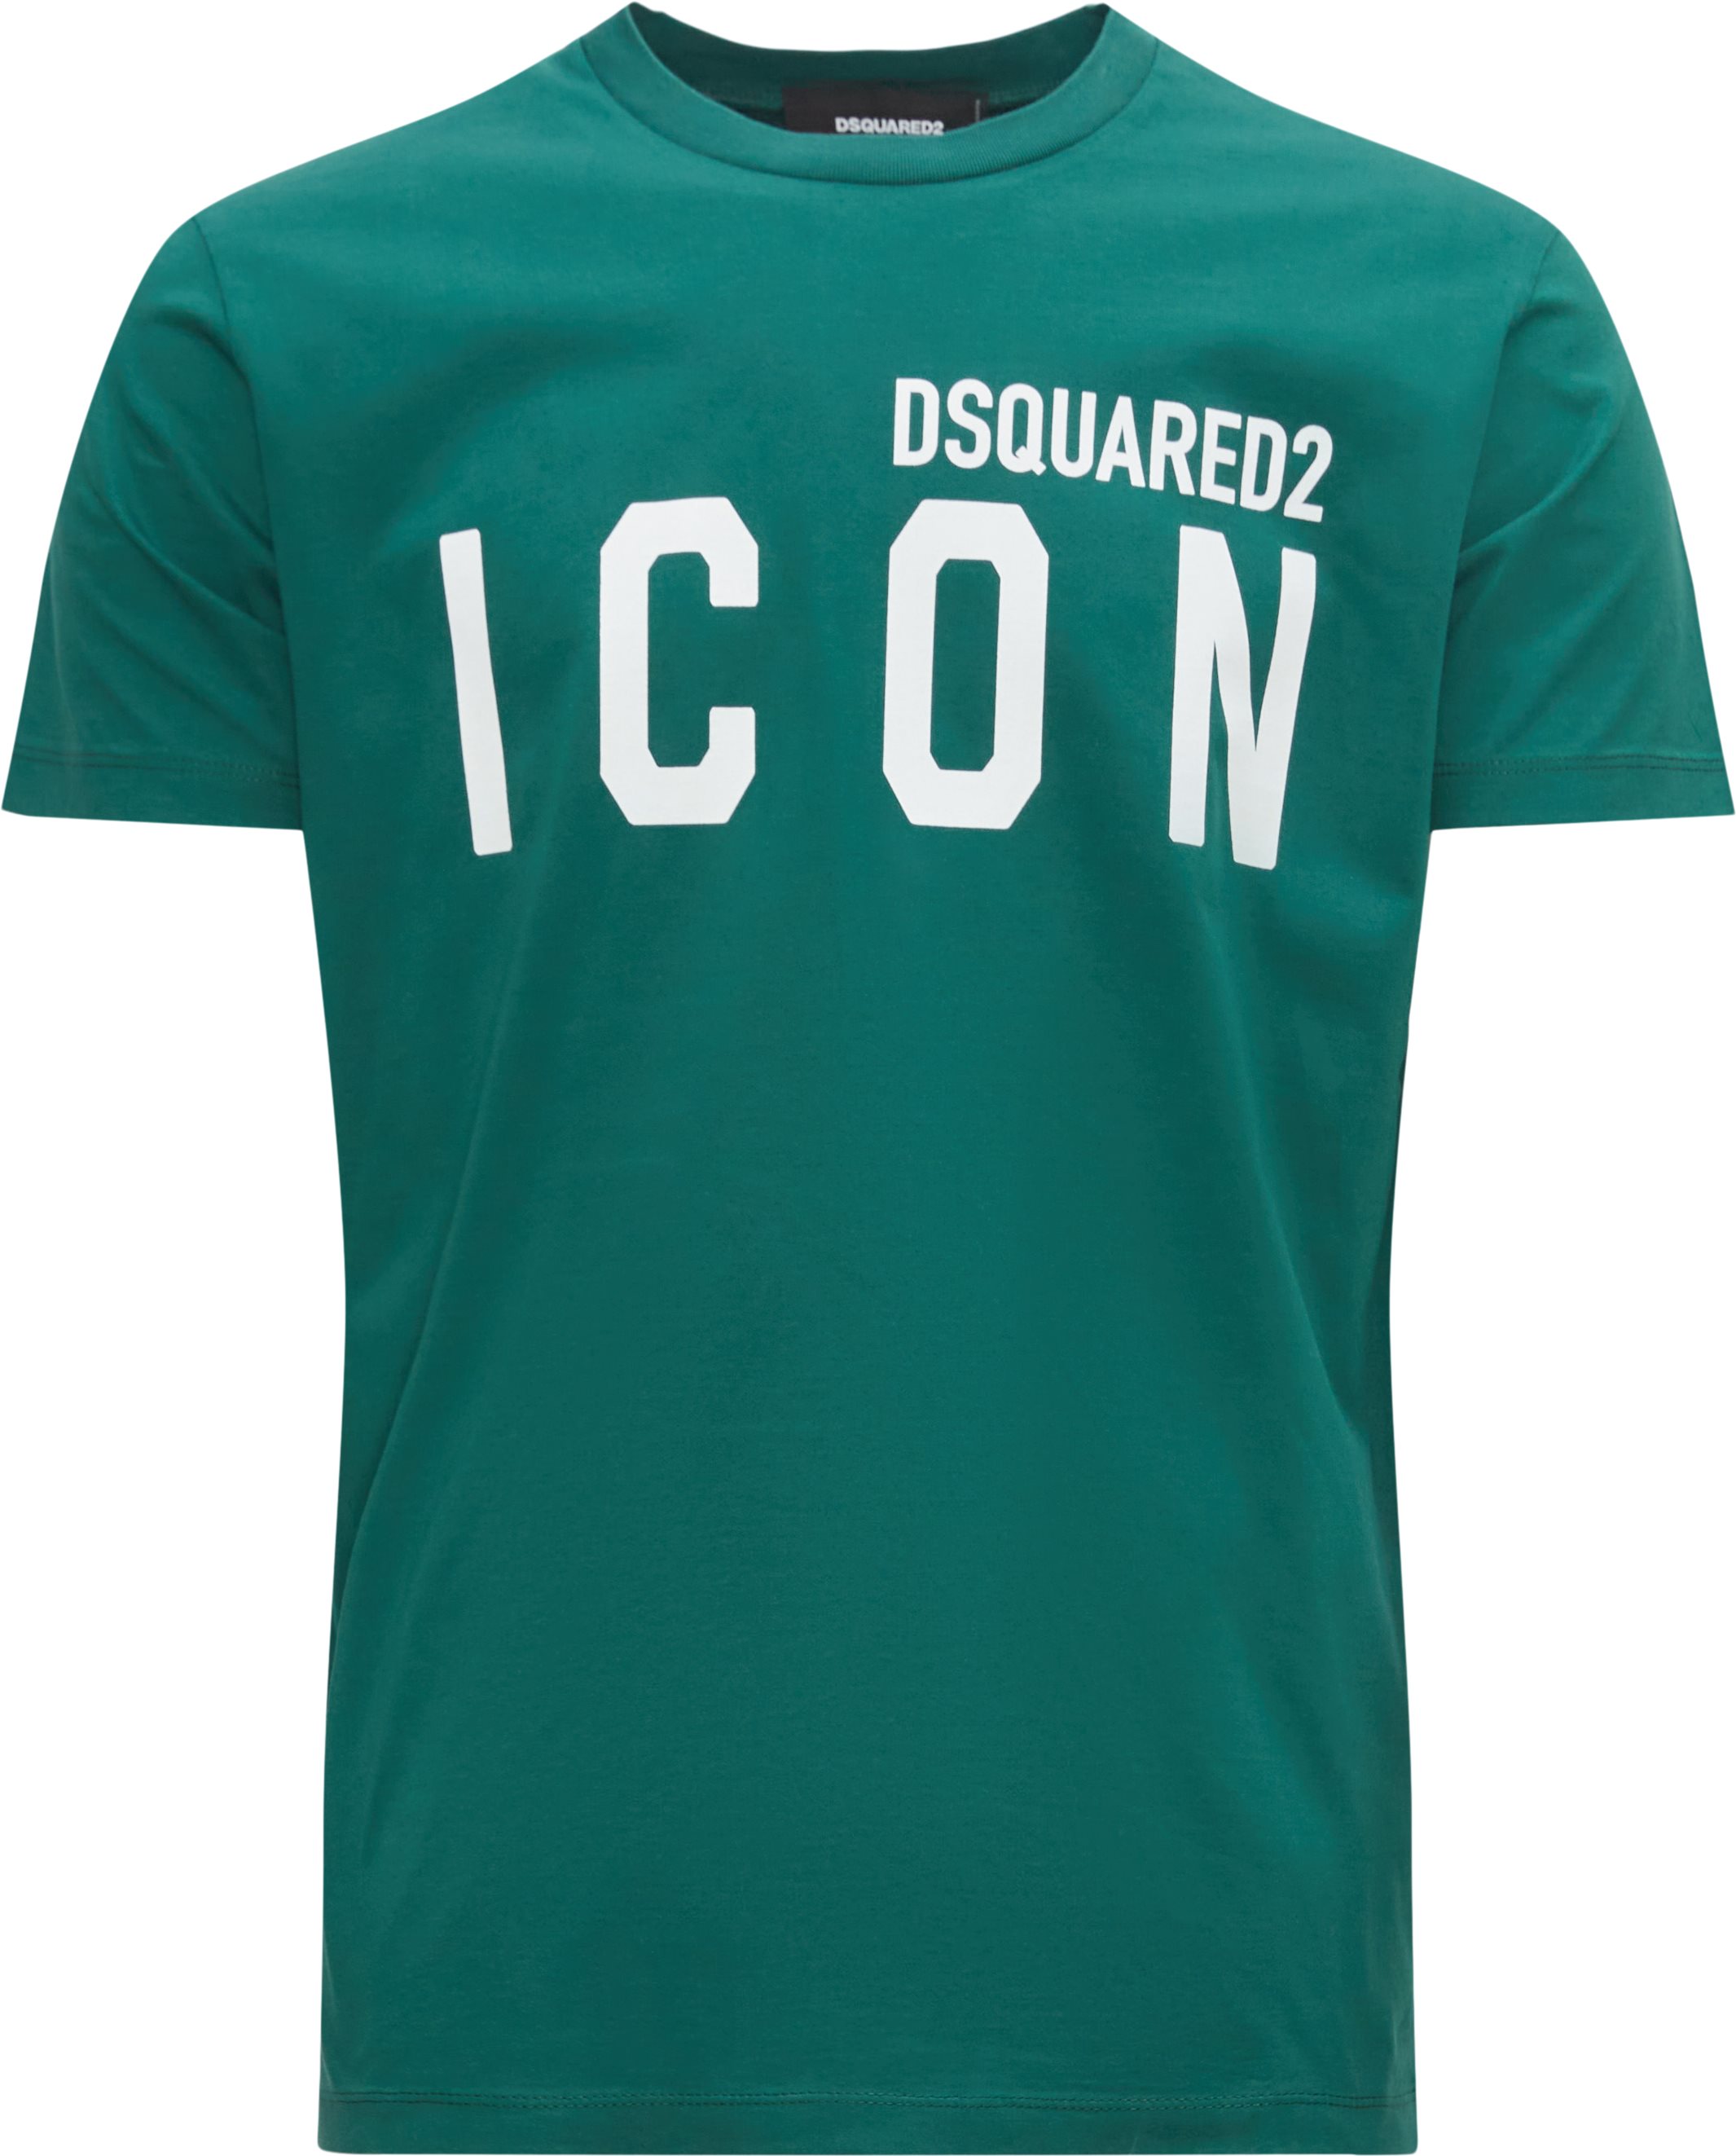 Be Icon Tee - T-shirts - Regular fit - Grøn